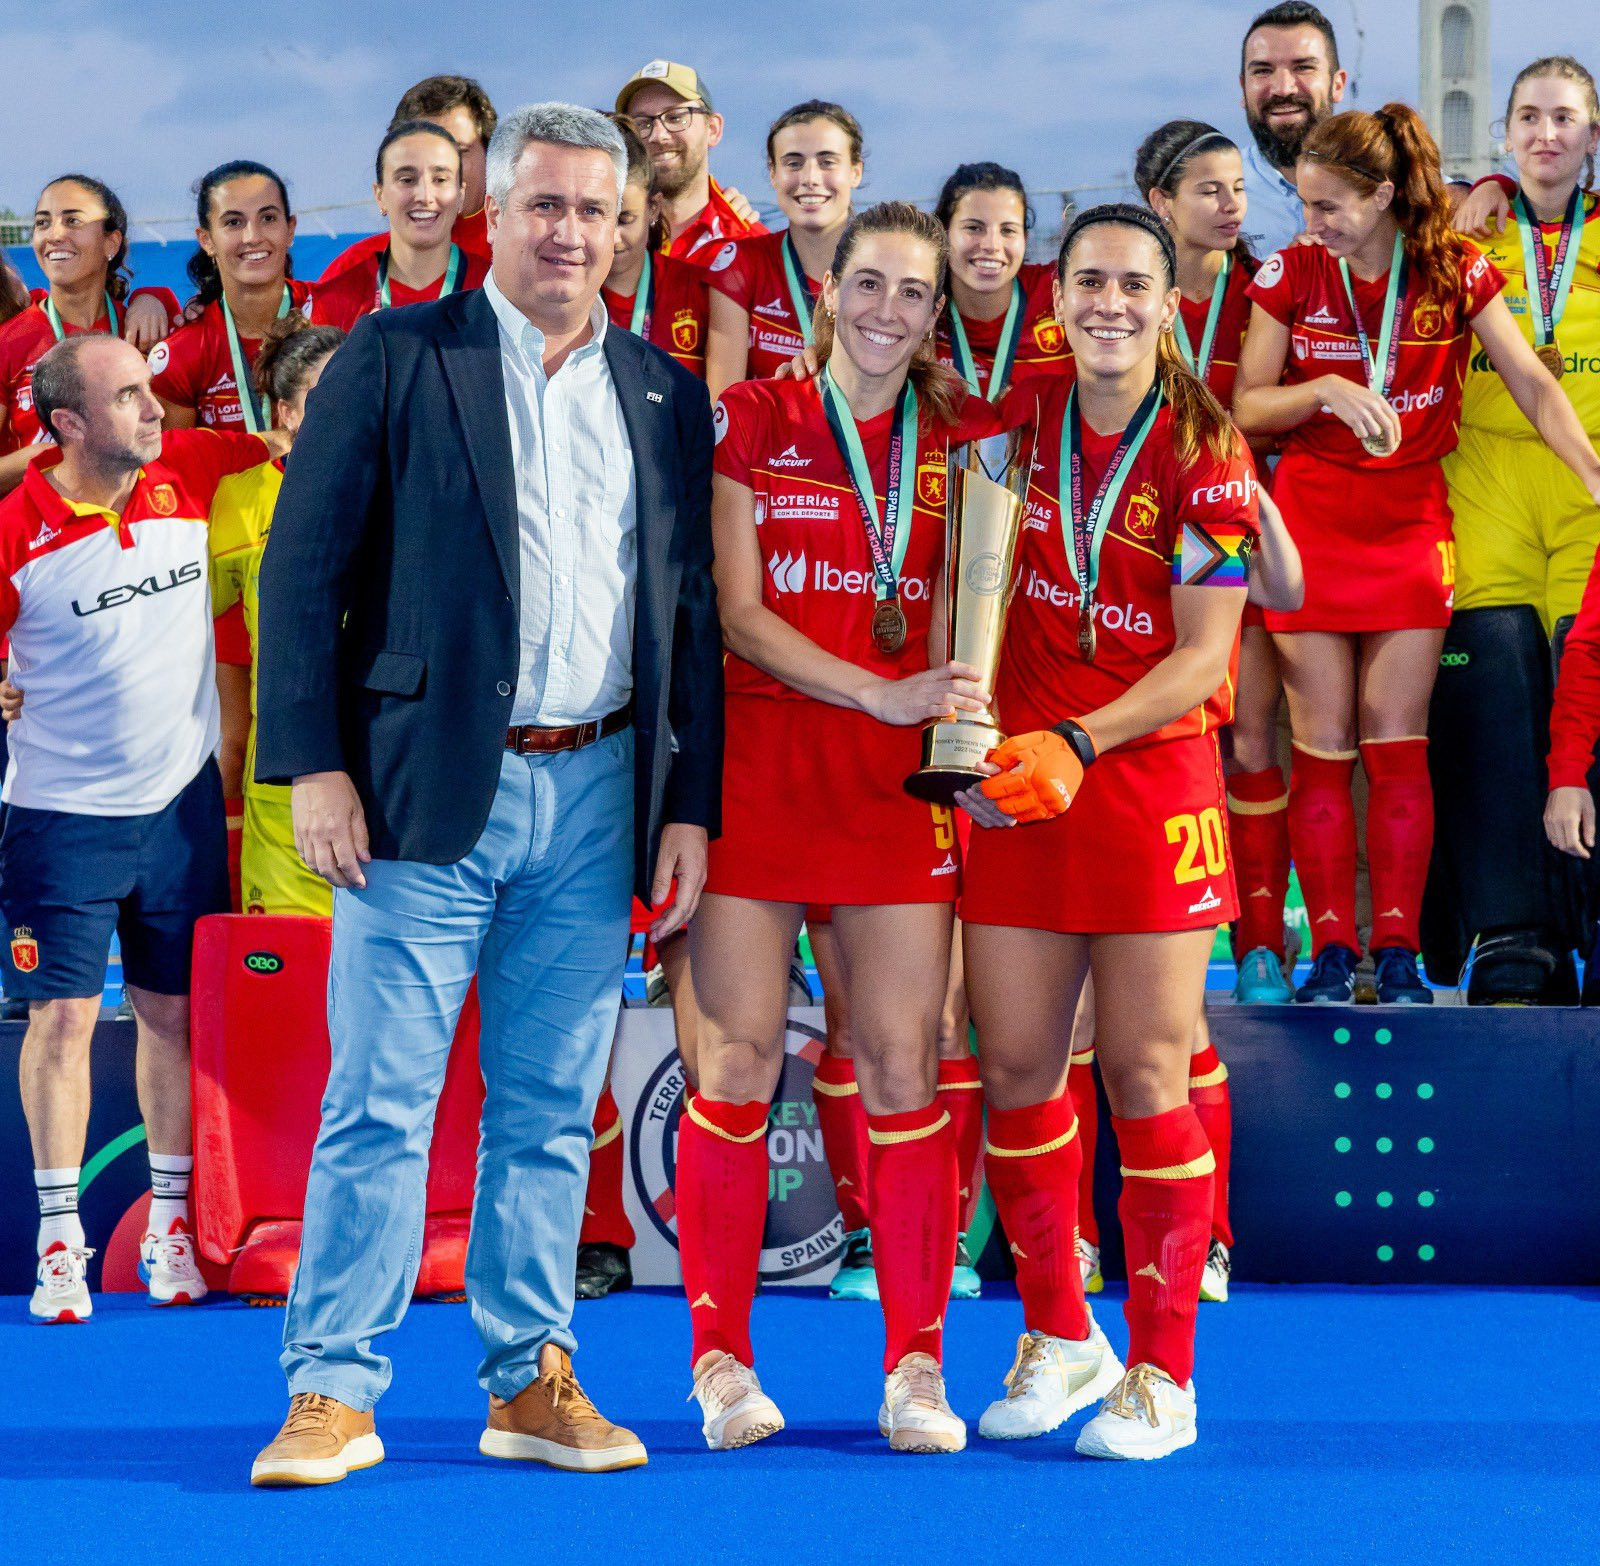 Spain won the Nations Cup Final on home soil, meaning Ireland missed out on promotion to the FIH Pro League. X @FIH_Hockey